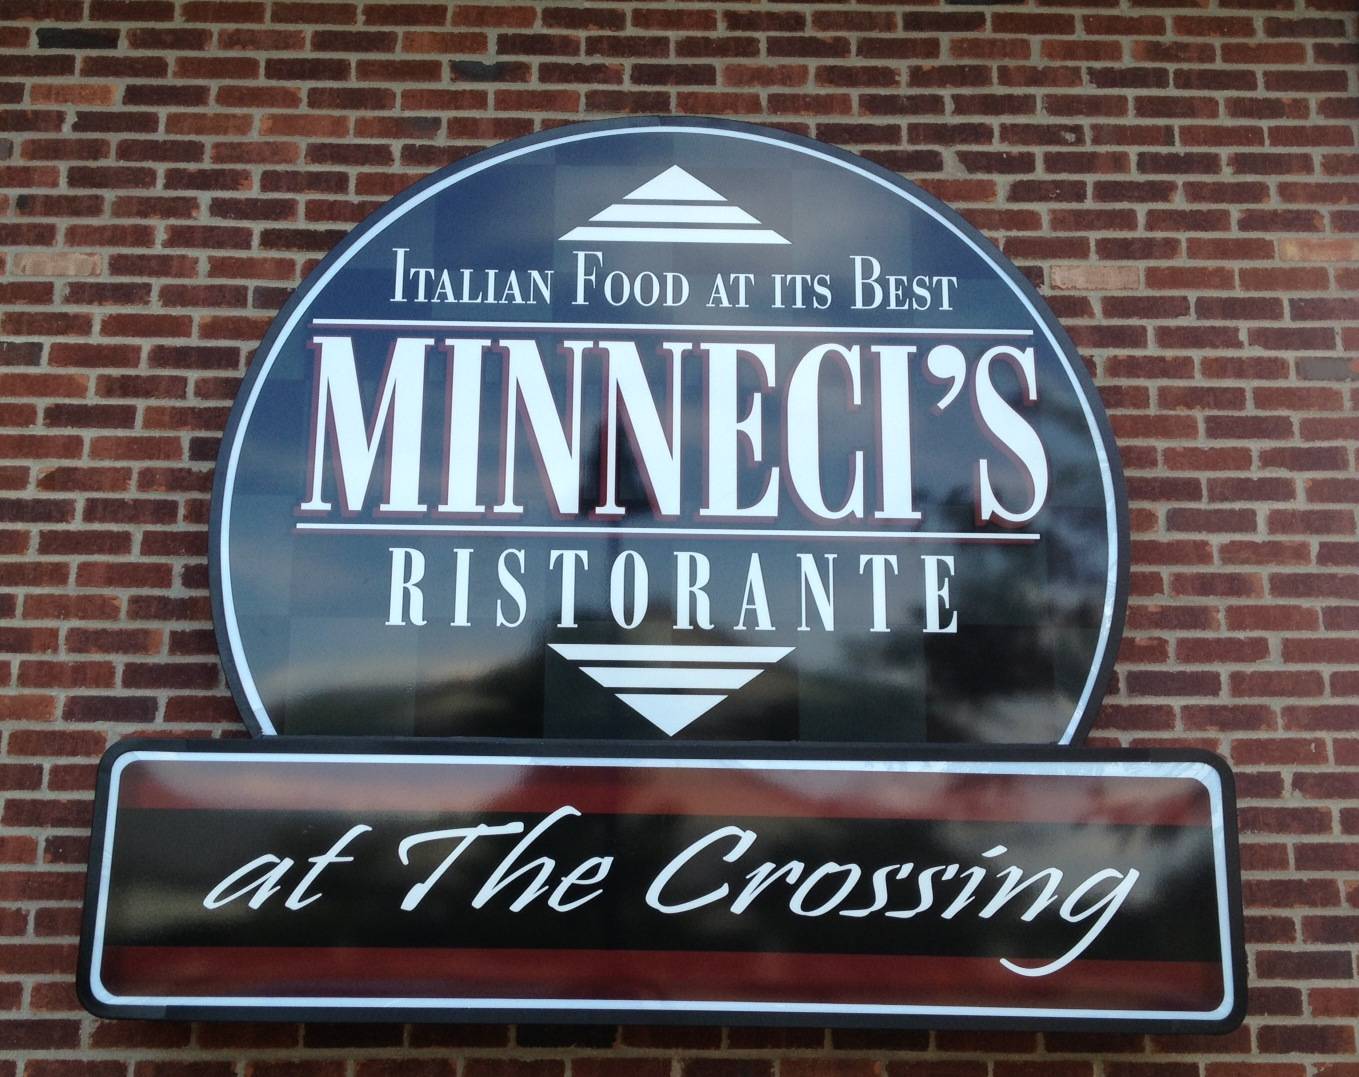 Minneci’s to open new location at the crossing